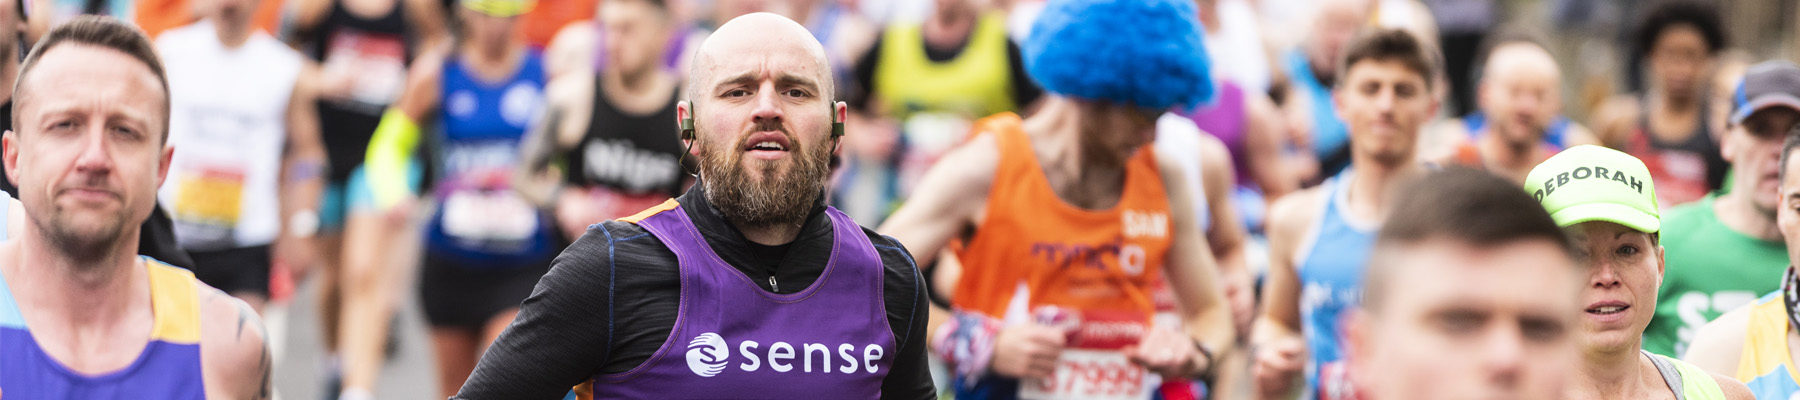 A man with a beard runs in a Sense running vest. There's a sea of people around him.